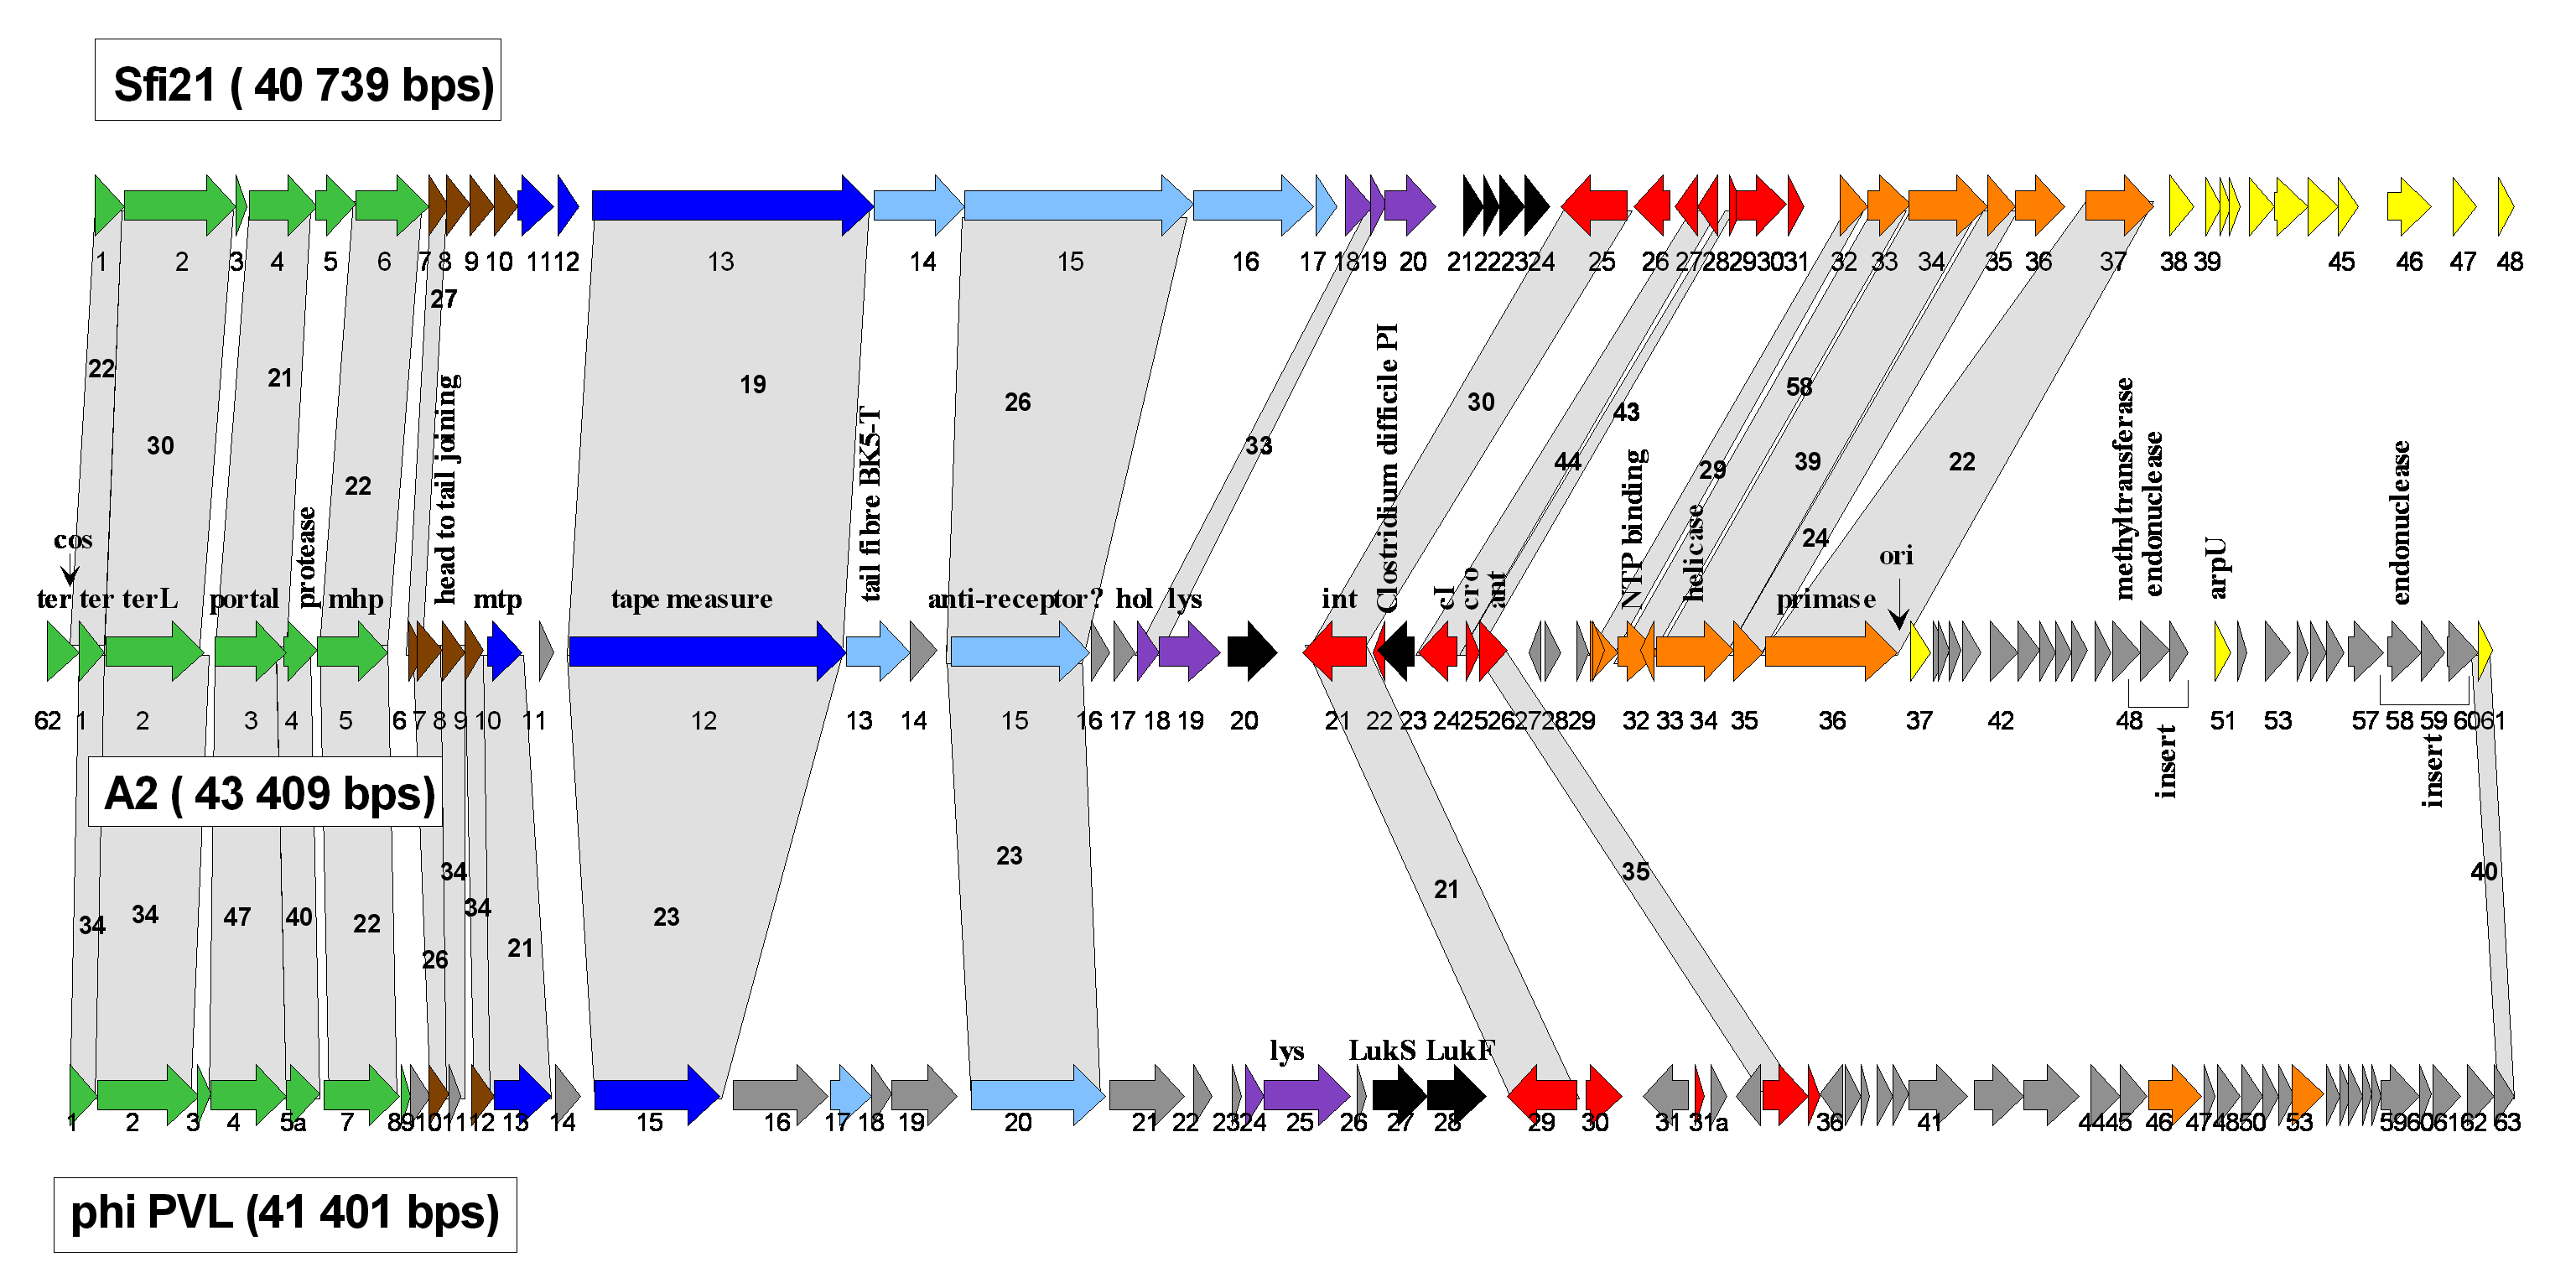 Figure 41-2: Comparative genome maps of selected Lactobacillus phages. A. Alignments of the genetic maps from the temperate cos-site Streptococcus thermophilus phage Sfi21, L. casei phage A2 and Staphylococcus aureus phage PVL. The ORFs are color coded according to their predicted functions starting with the DNA packaging and head genes (green) at the left, followed by head-to-tail (brown), tail (dark blue), tail fiber (light blue),  lysis (violet), candidate lysogenic conversion (black), lysogeny (red), DNA replication (orange) and transcriptional regulation genes (yellow). Unattributed genes appear as grey arrows. Genes sharing significant sequence identity at the protein level are linked by grey shading; the bold figures indicate degree of aa identity in %. B. Alignment of the late gene cluster from pac-site Siphoviridae from Bacillus subtilis phage SPP1, L. plantarum phage phig1e, L. delbrueckii phage LL-H, Listeria monocytogenes phage A118, L. johnsonii prophage Lj965, Streptococcus thermophilus phage Sfi11 and Lactococcus lactis phage TP901-1. Selected genes are color-coded: small subunit terminase (red), large subunit terminase (orange), portal (yellow), scaffold (green), major head (blue), major tail (violet), holin (mauve) and lysin gene (black). Genes sharing significant sequence identity at the protein level are linked by blue (neighbors) or grey shading; the percentages correspond to aa identity and E-value.